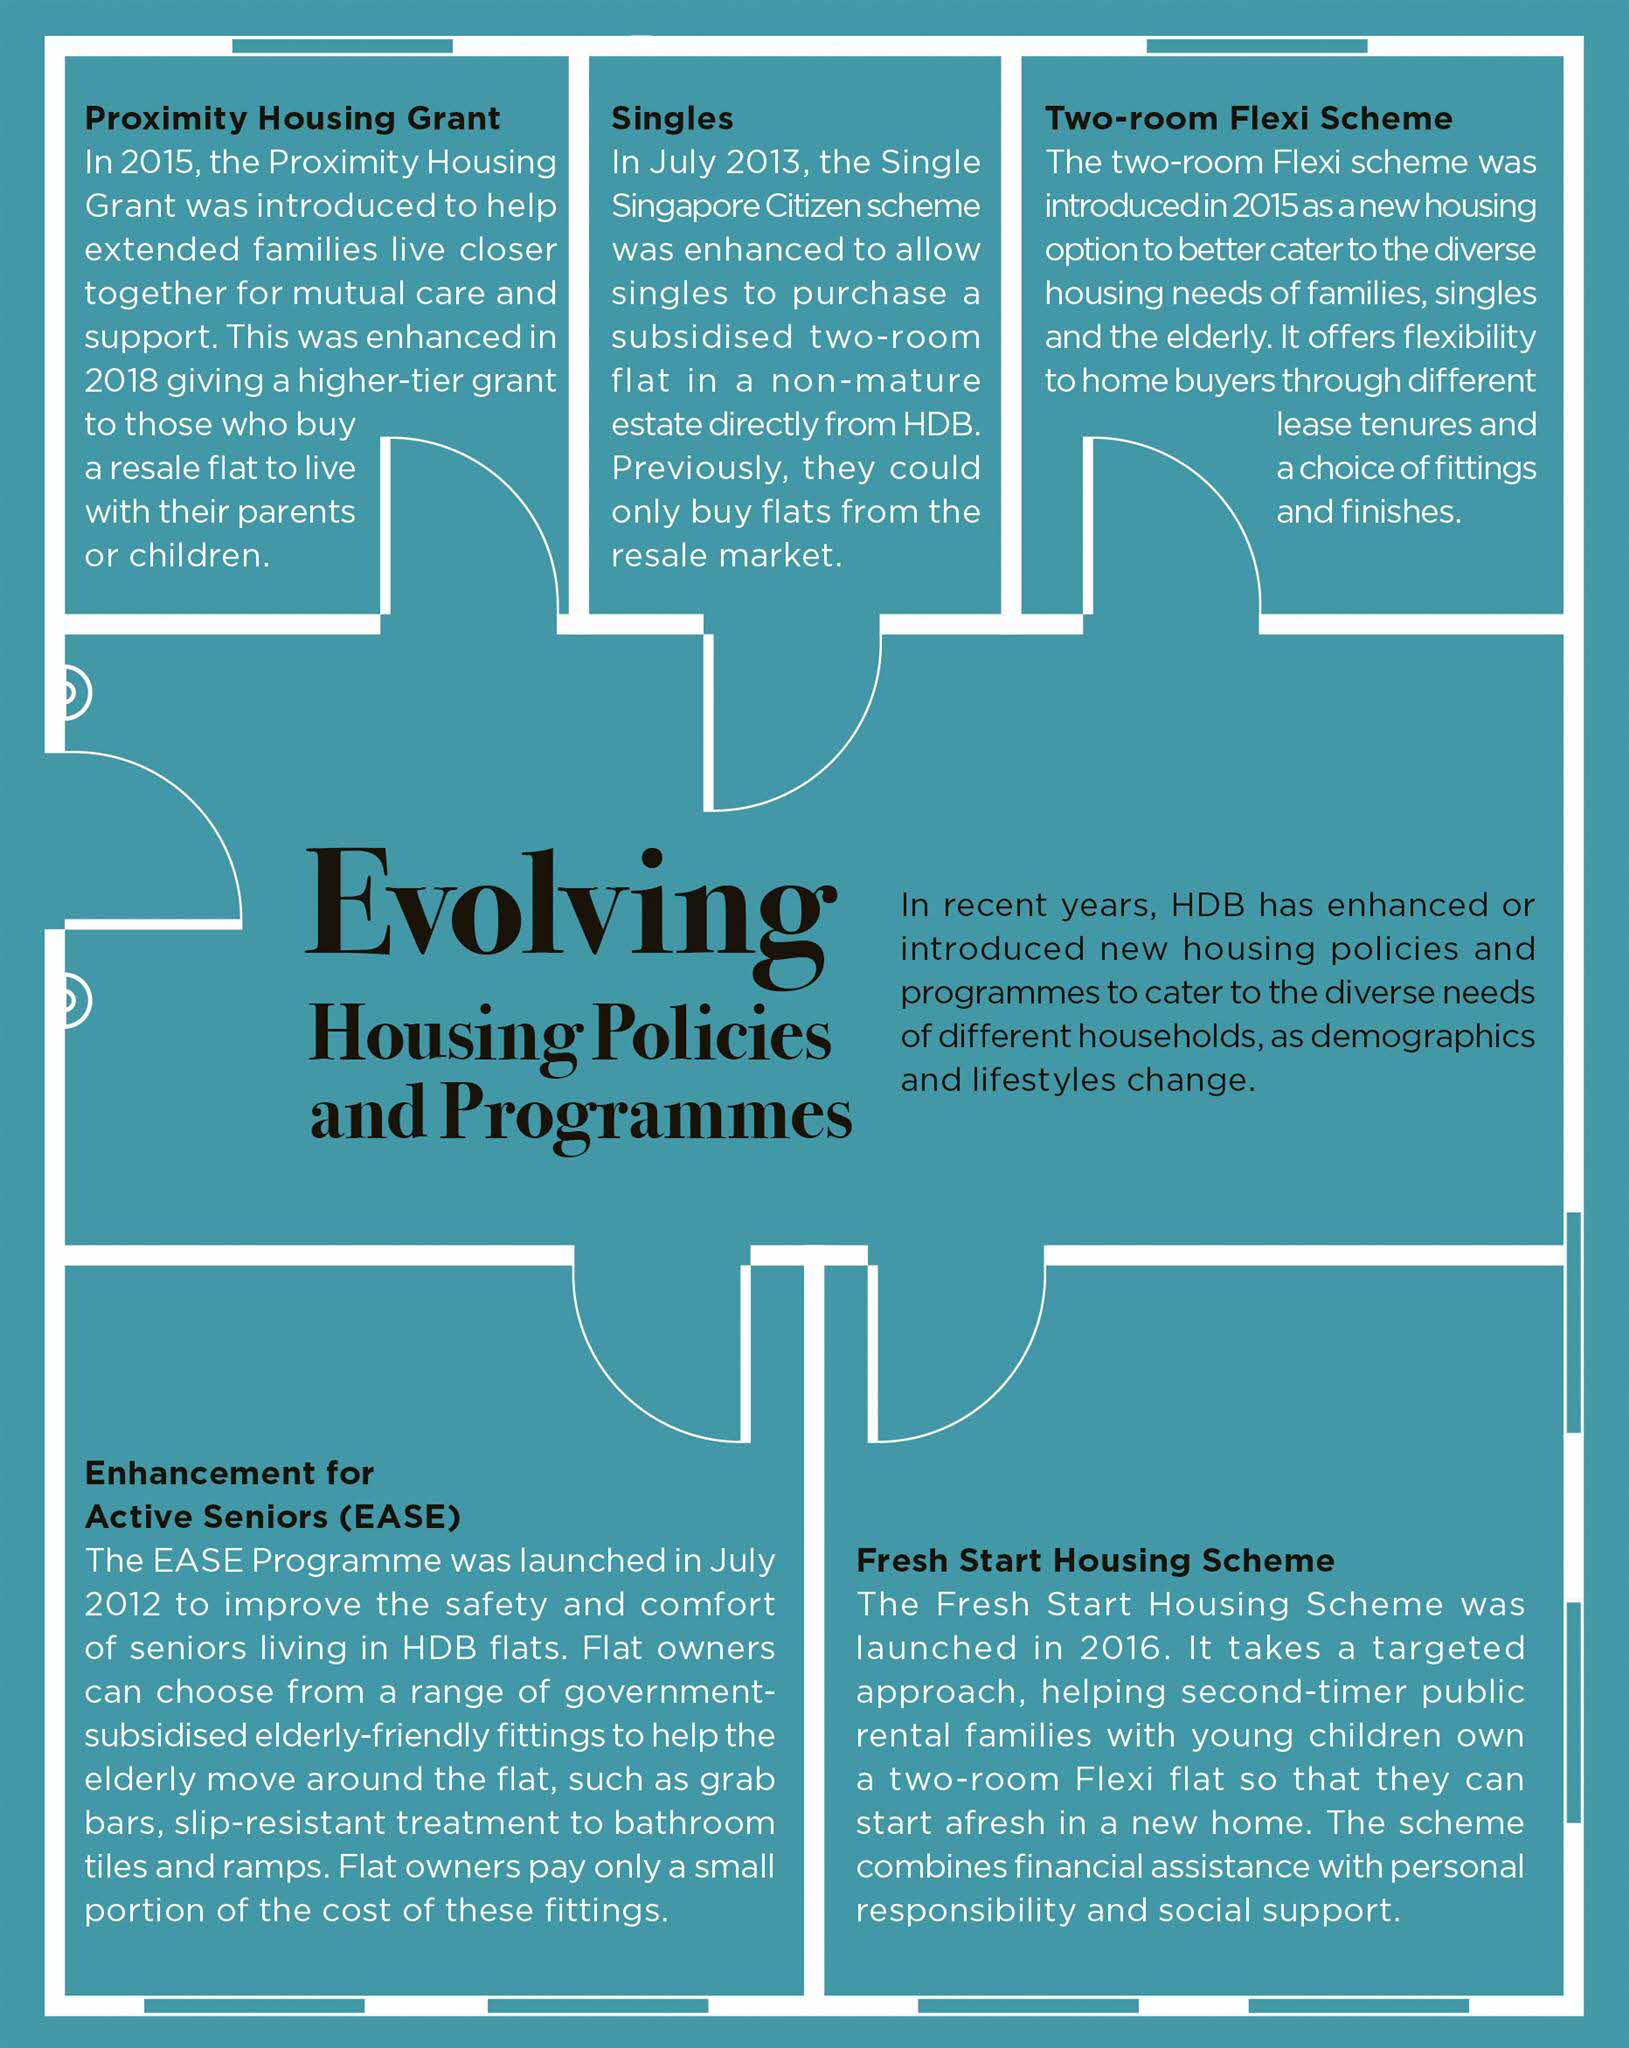 Evolving Housing Policies and Programmes